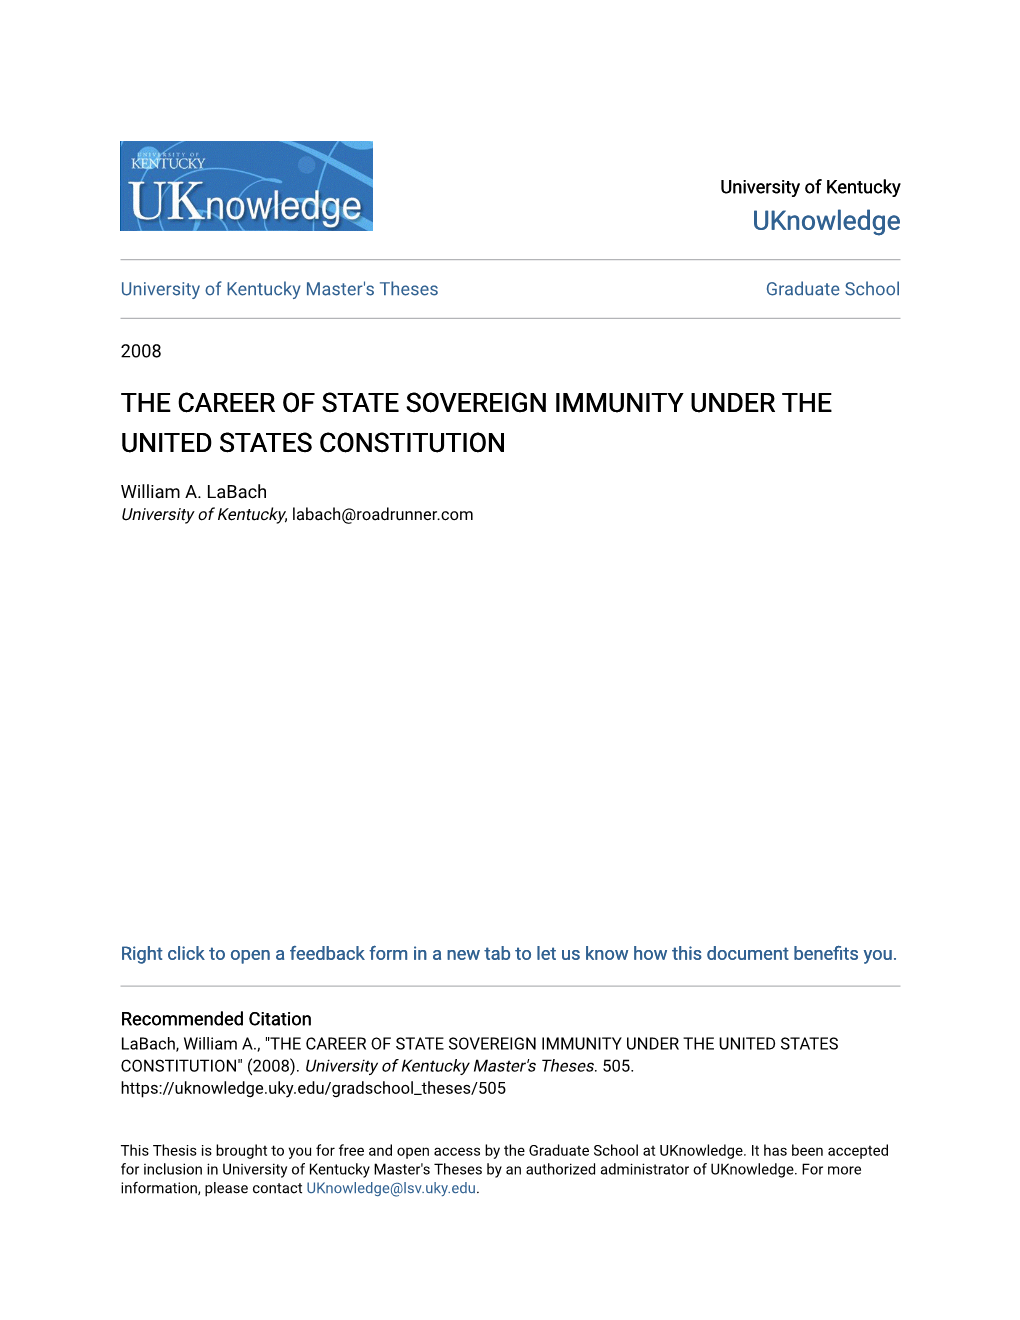 The Career of State Sovereign Immunity Under the United States Constitution